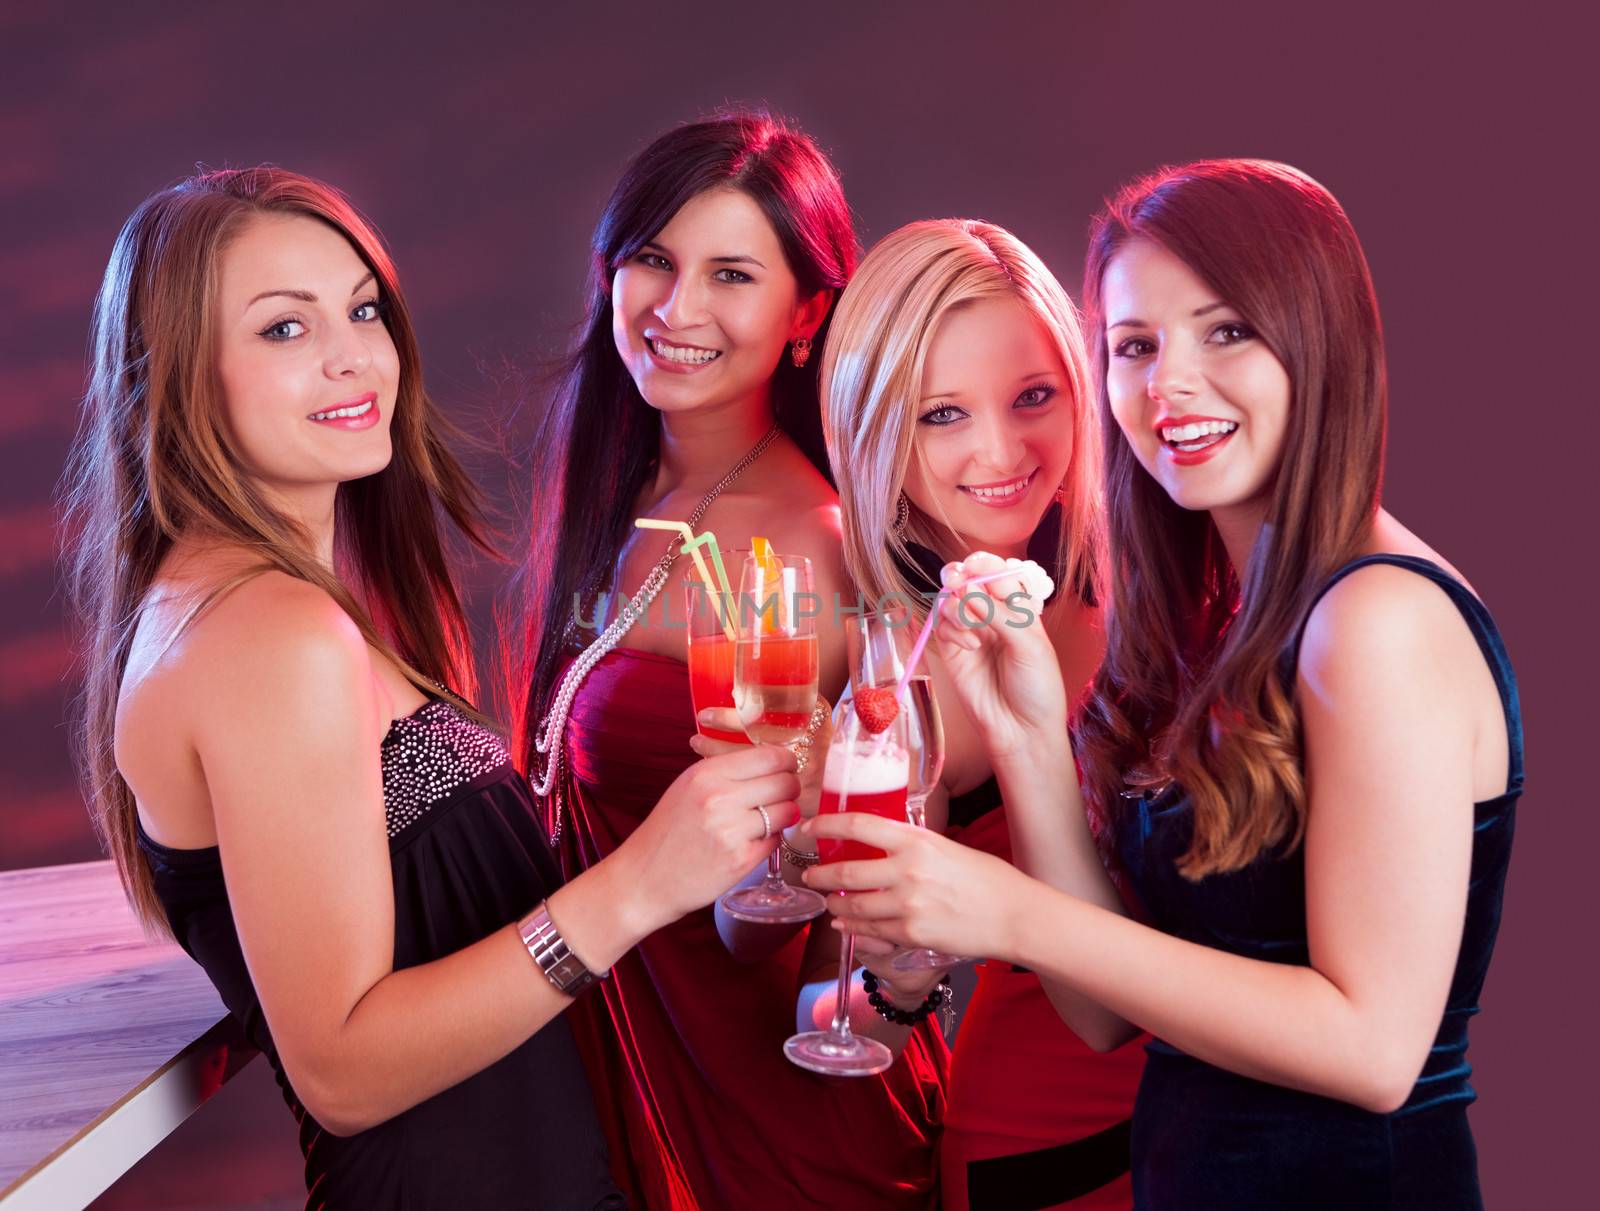 Group of four happy beautiful young female friends celebrating in a nightclub with glasses of cocktail in their hands